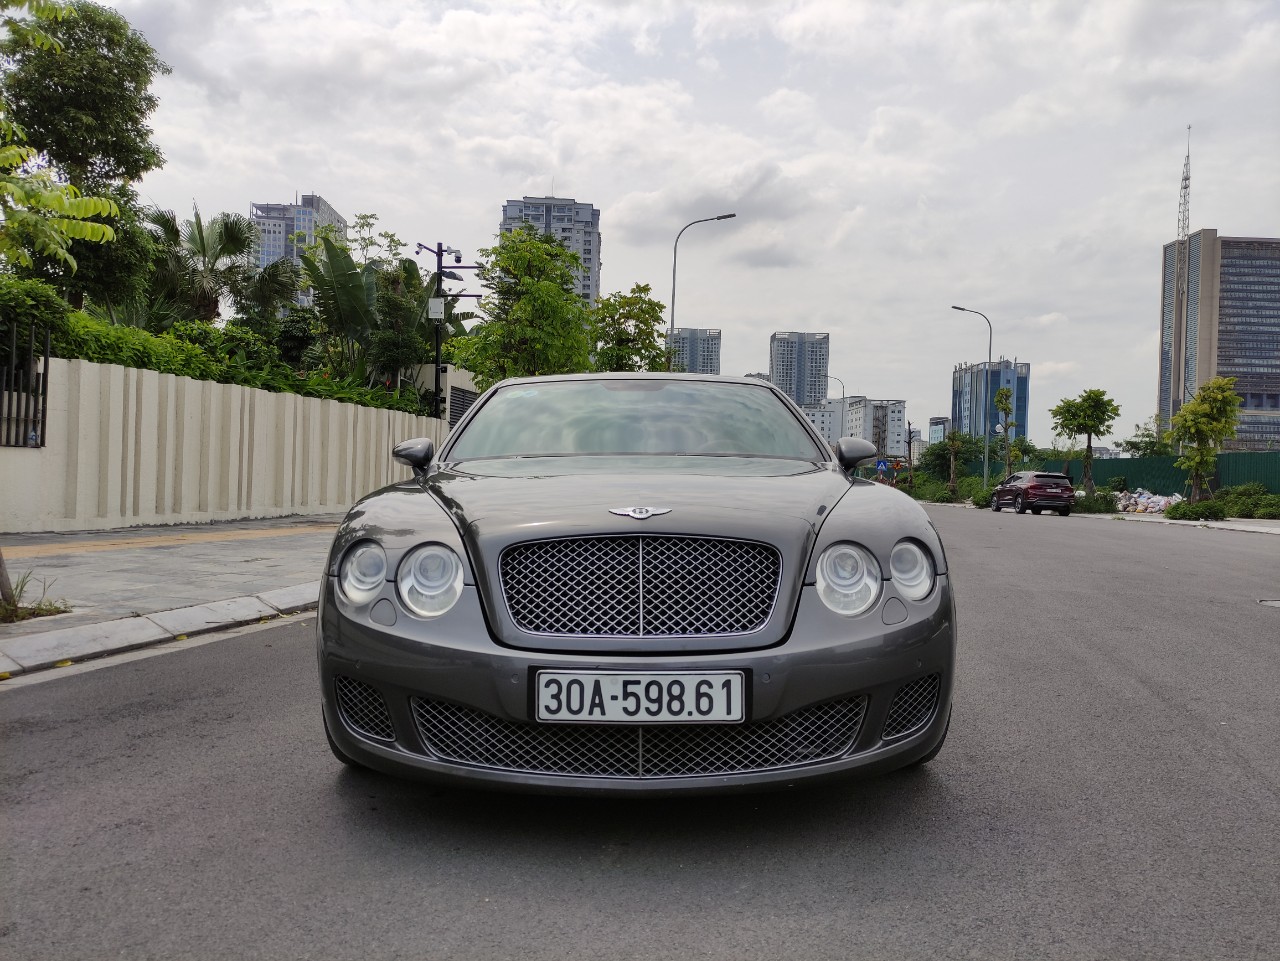 Bentley Continental Flying Spur continental 2008 - Bán Bentley Continental Flying Spur 2008 đăng ký 2009, siêu mới